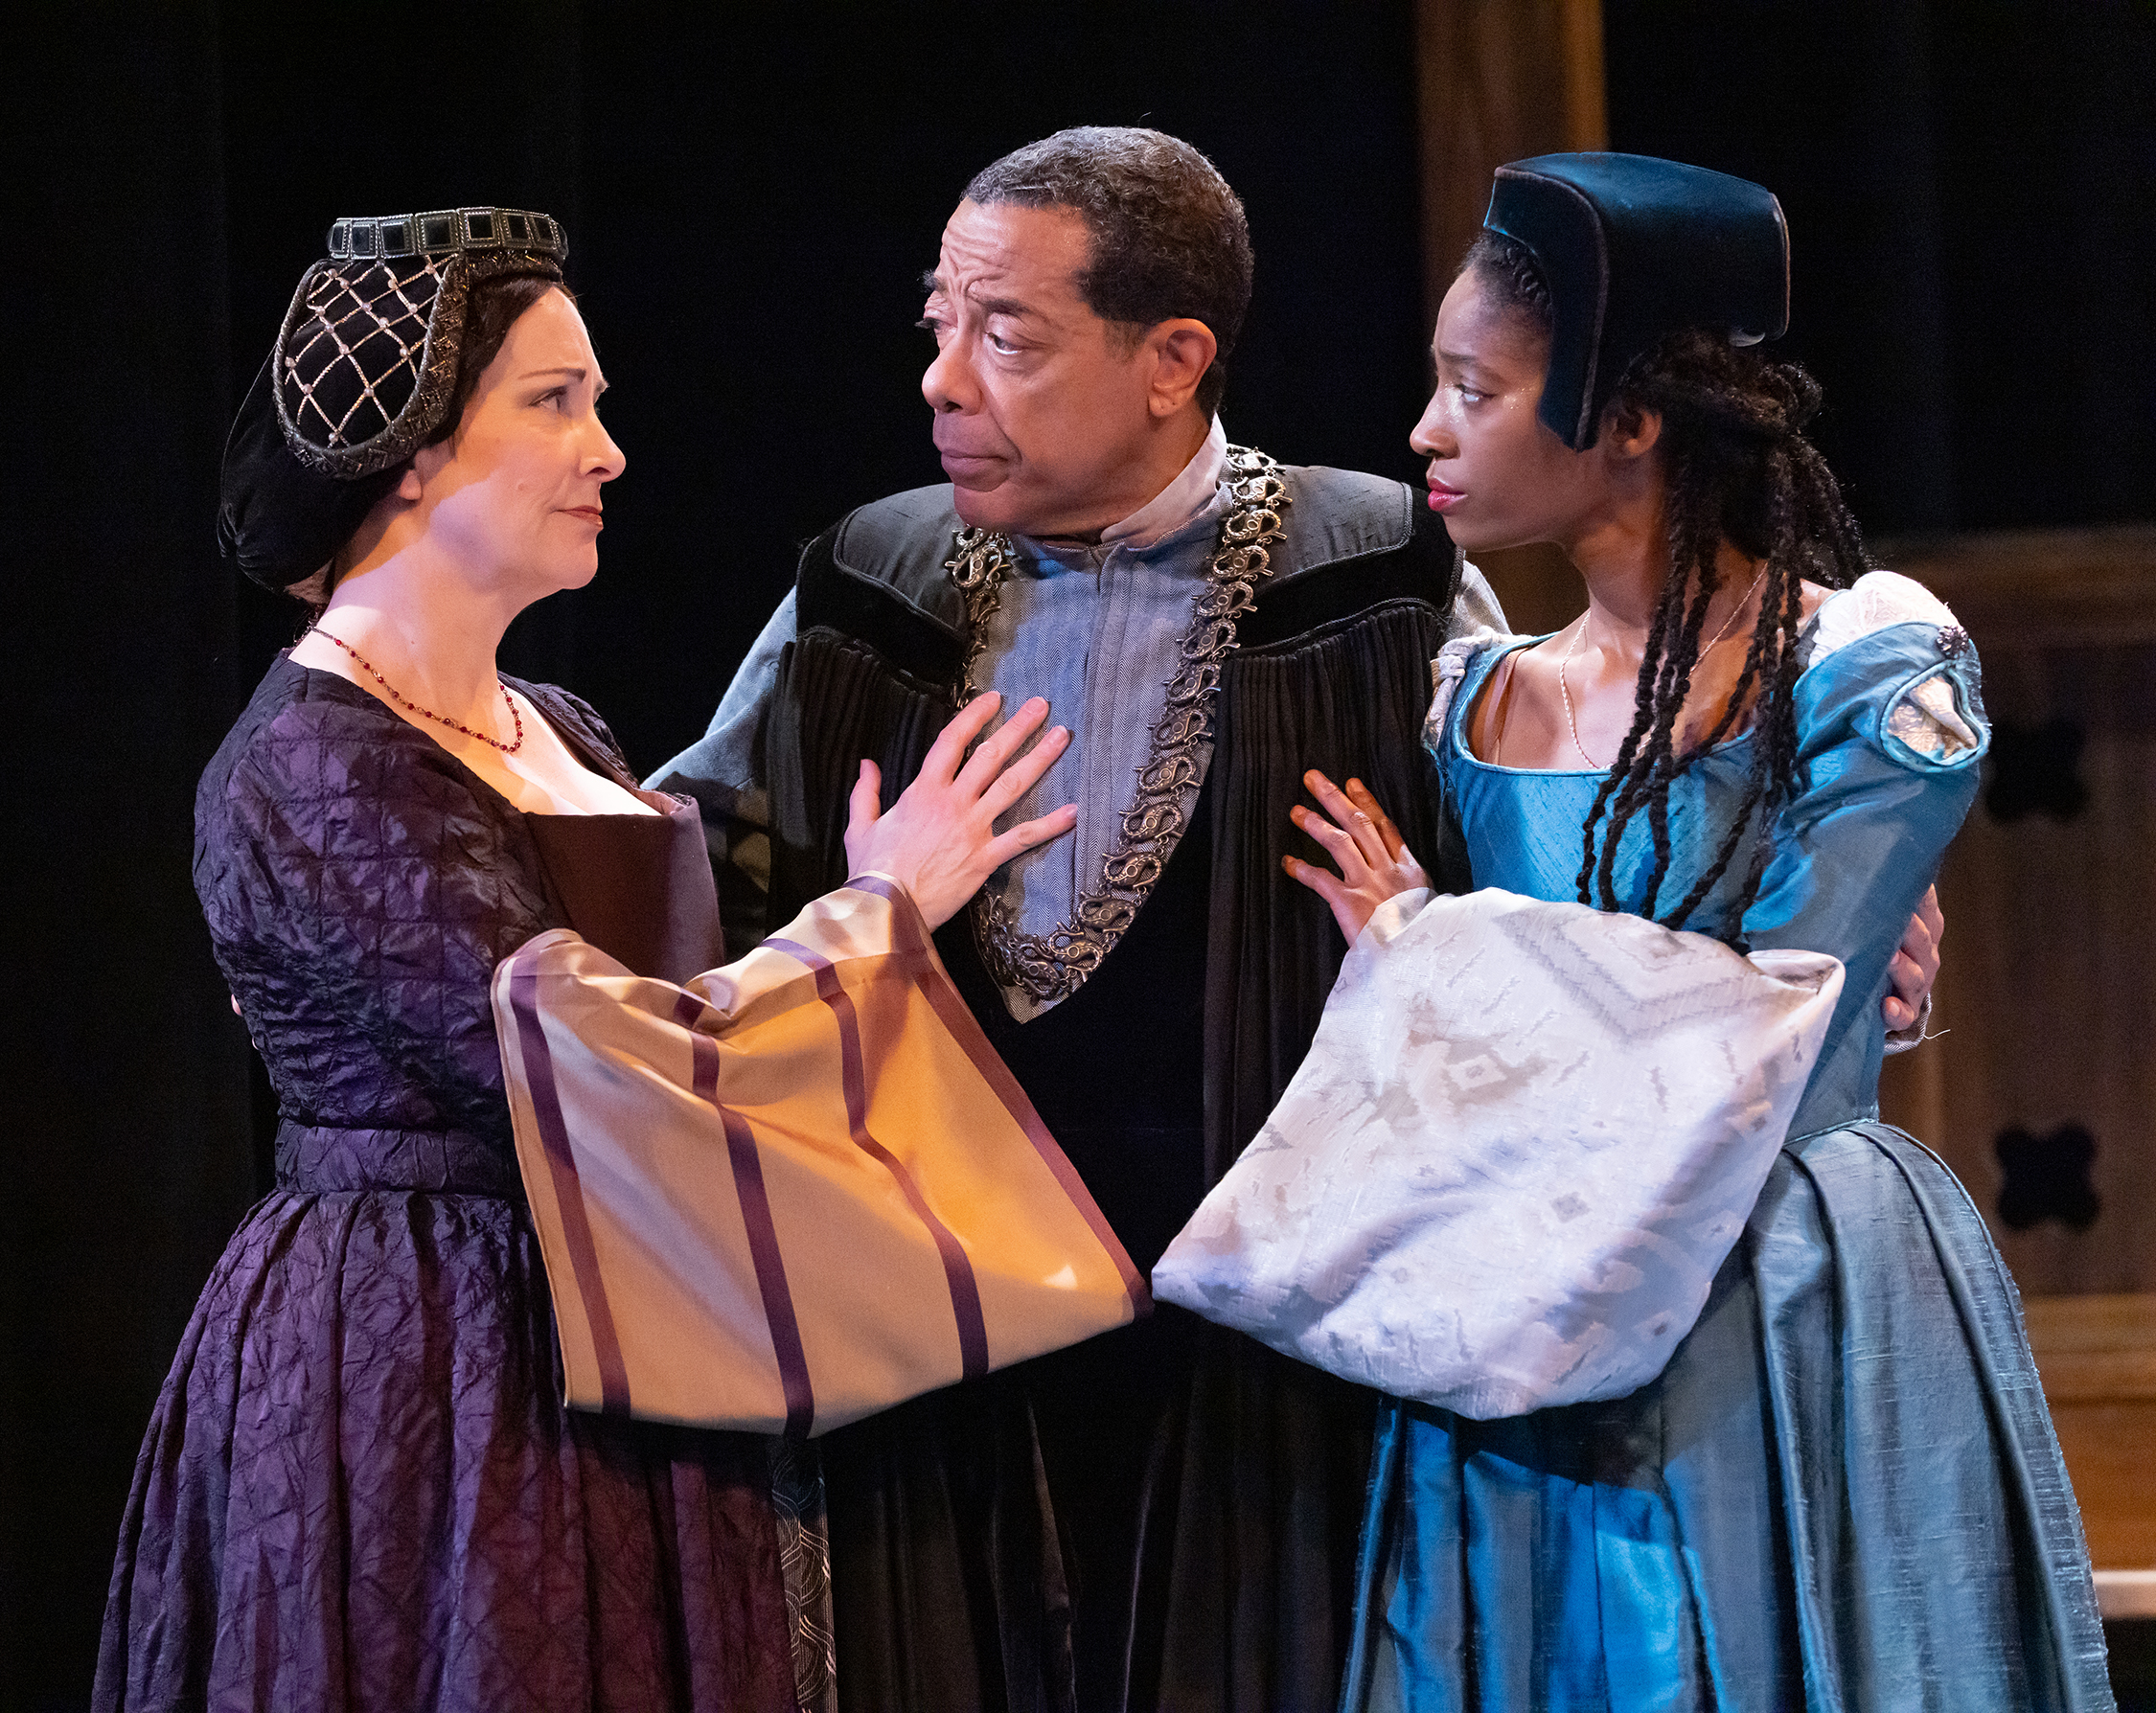 Mary Elizabeth Scallen, Frank X, and Morgan Charéce Hall in Lantern Theater Company's production of A MAN FOR ALL SEASONS. Photo by Mark Garvin.